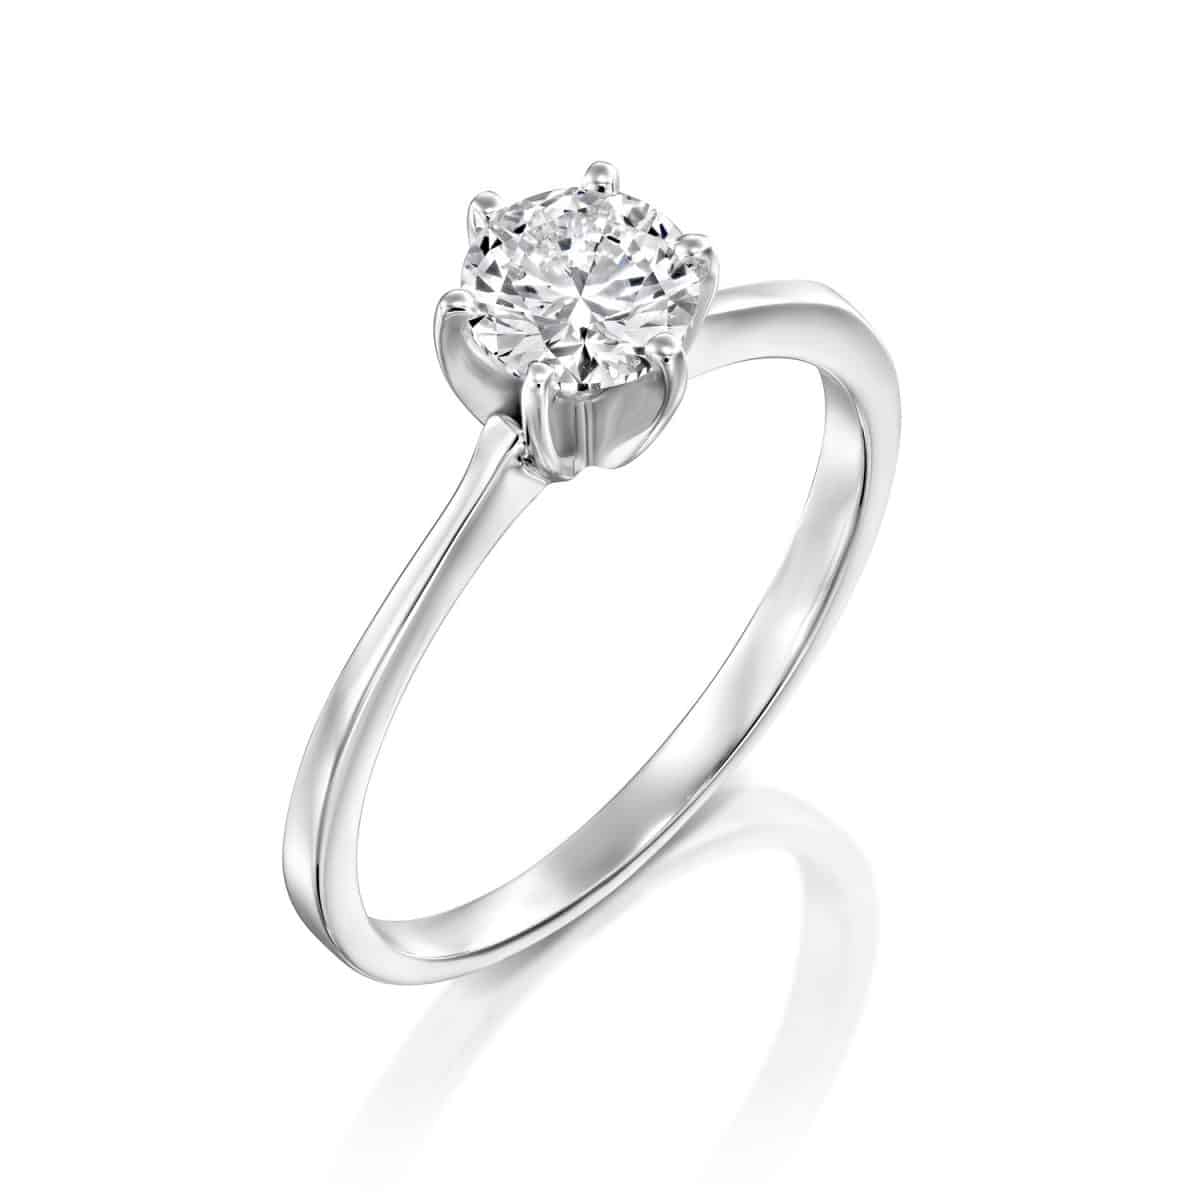 Shannon - White Gold Lab Grown Diamond Engagement Ring 0.41ct. - main